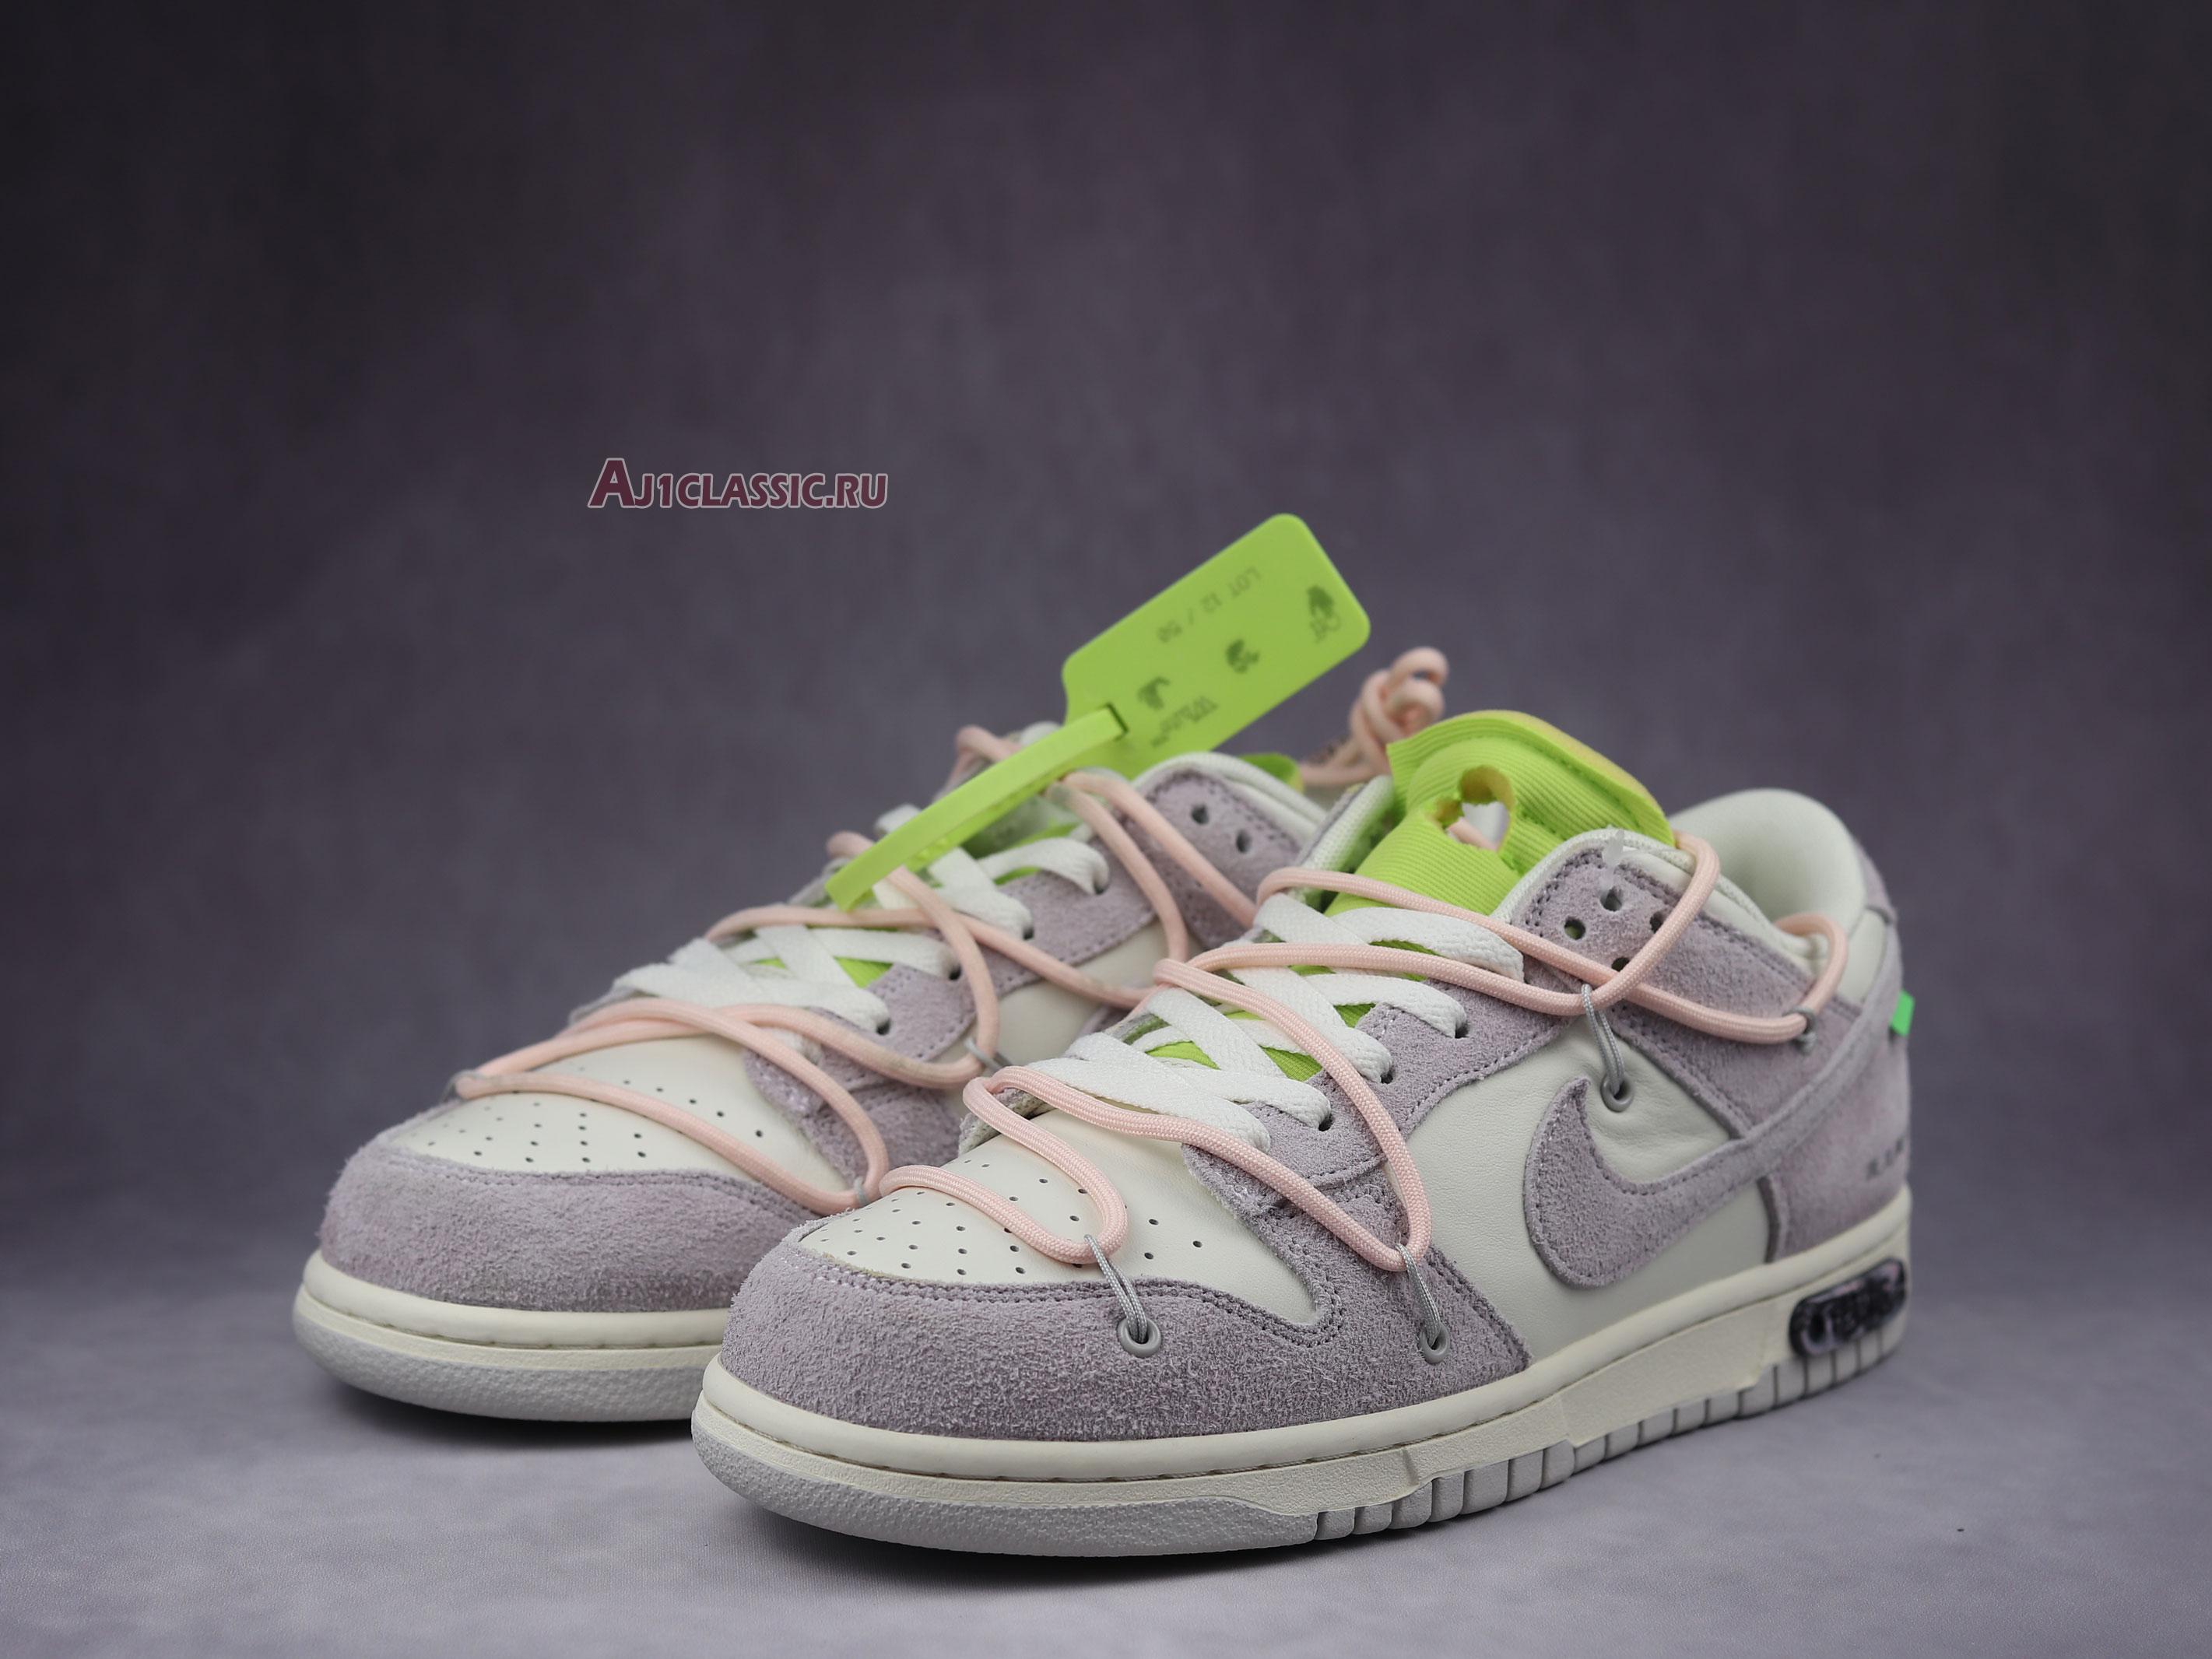 Off-White x Nike Dunk Low "Lot 12 of 50" DJ0950-100